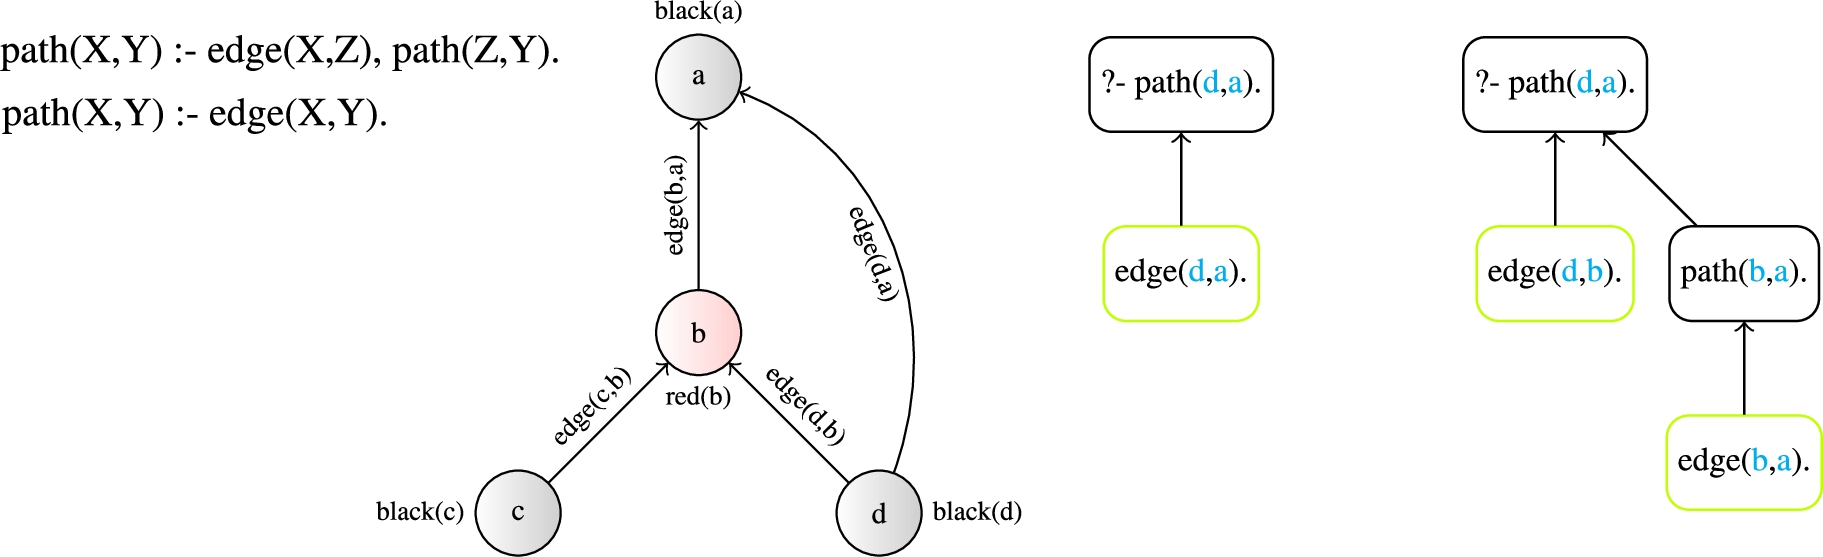 An example learned ILP model of a path (left), being unfolded on a labeled graph sample encoded in relational logic (middle), resulting into two different computation graphs for the same target query “path(d, a)” (right).